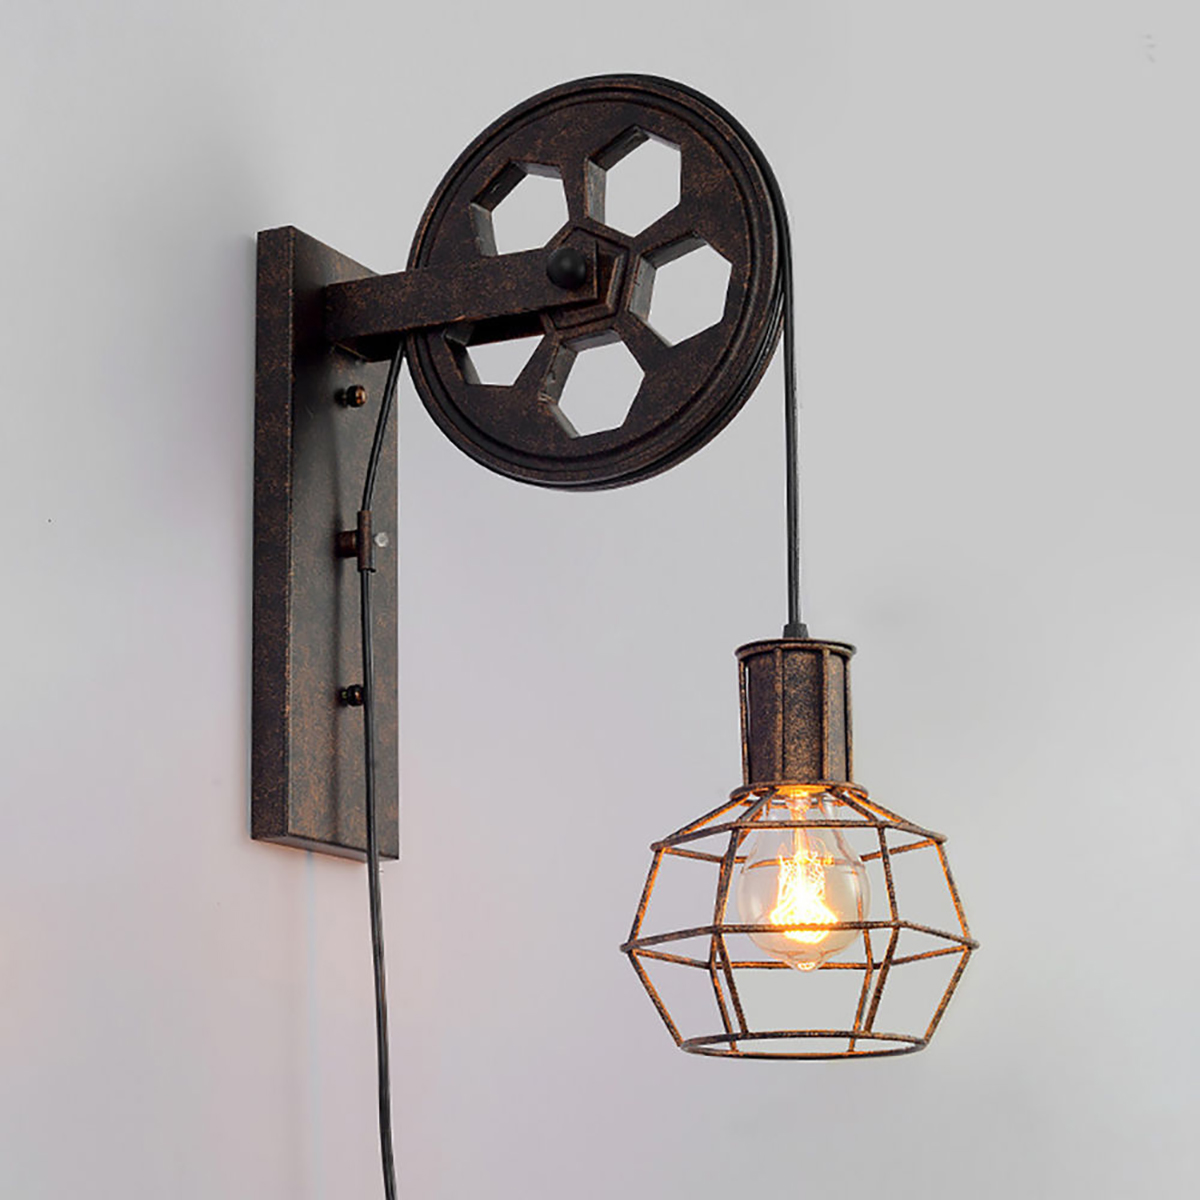 Adjustable-Retro-Iron-Wall-Lamp-Lifting-Pulley-E27-Sconce-Light-Indoor-4-Color-Without-Light-Bulb-1709520-10